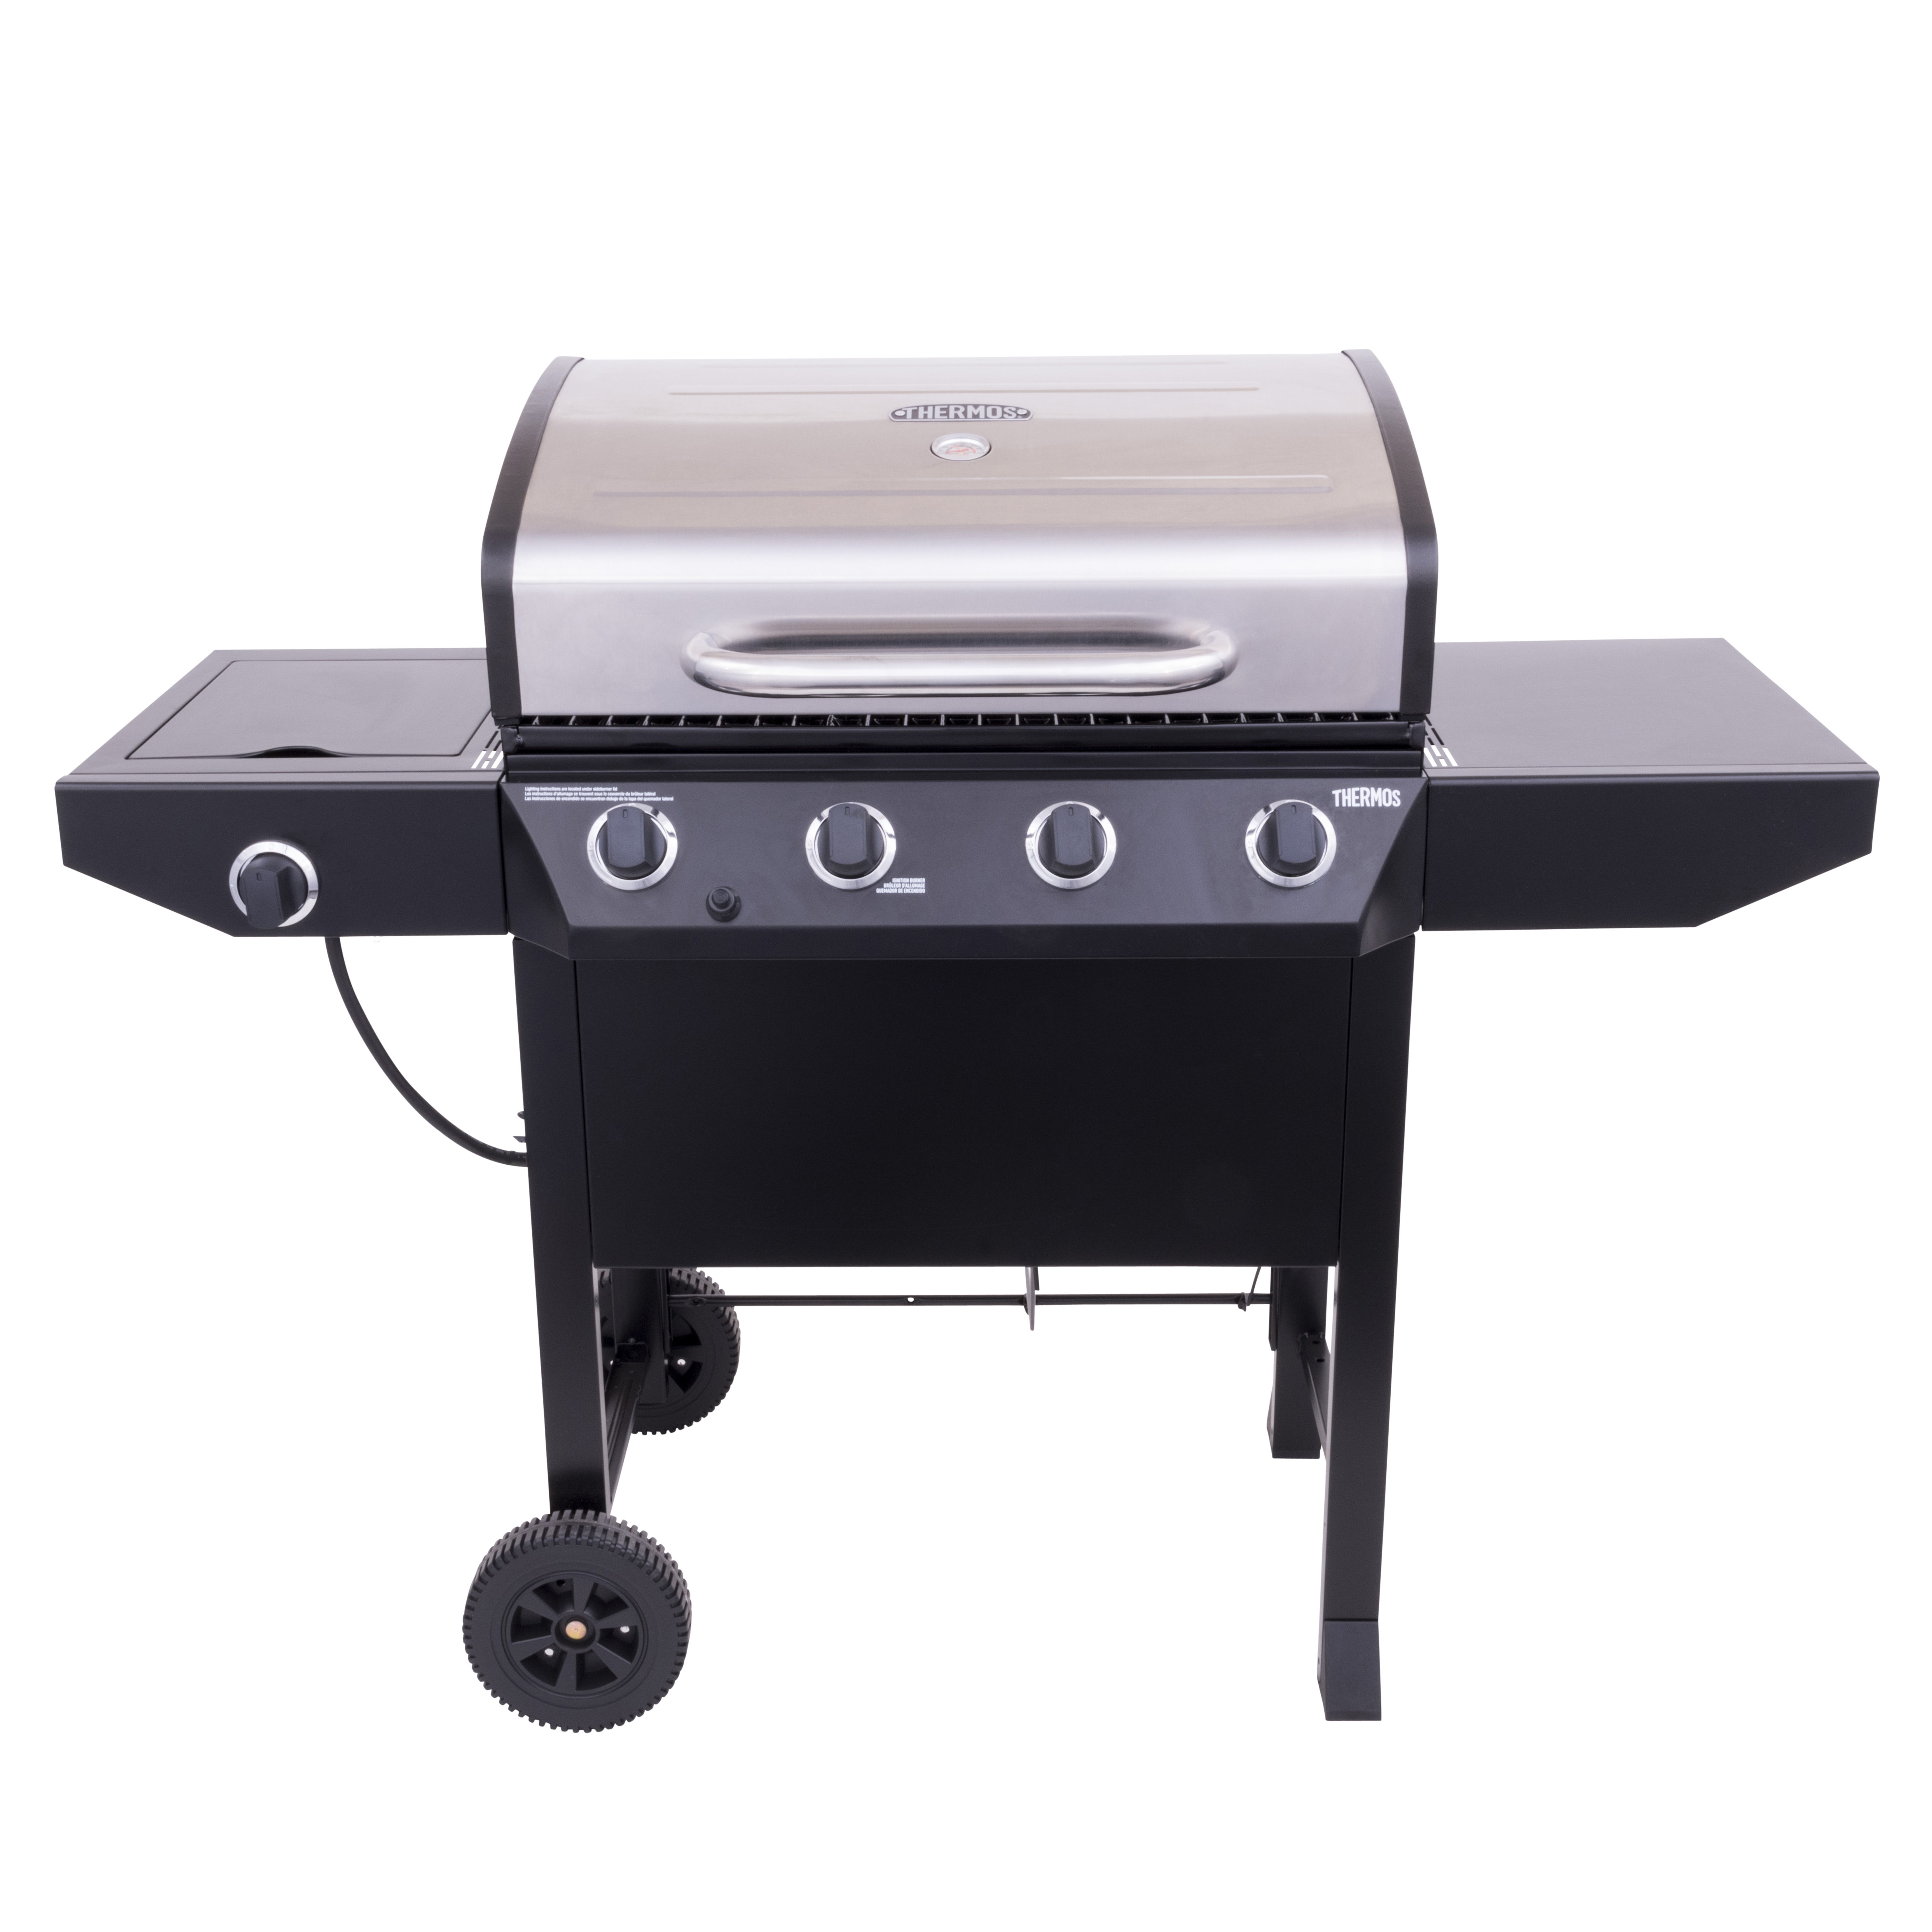 Thermos 4 Burner Propane Gas Grill Reviews Wayfair,How To Inject A Turkey For Smoking